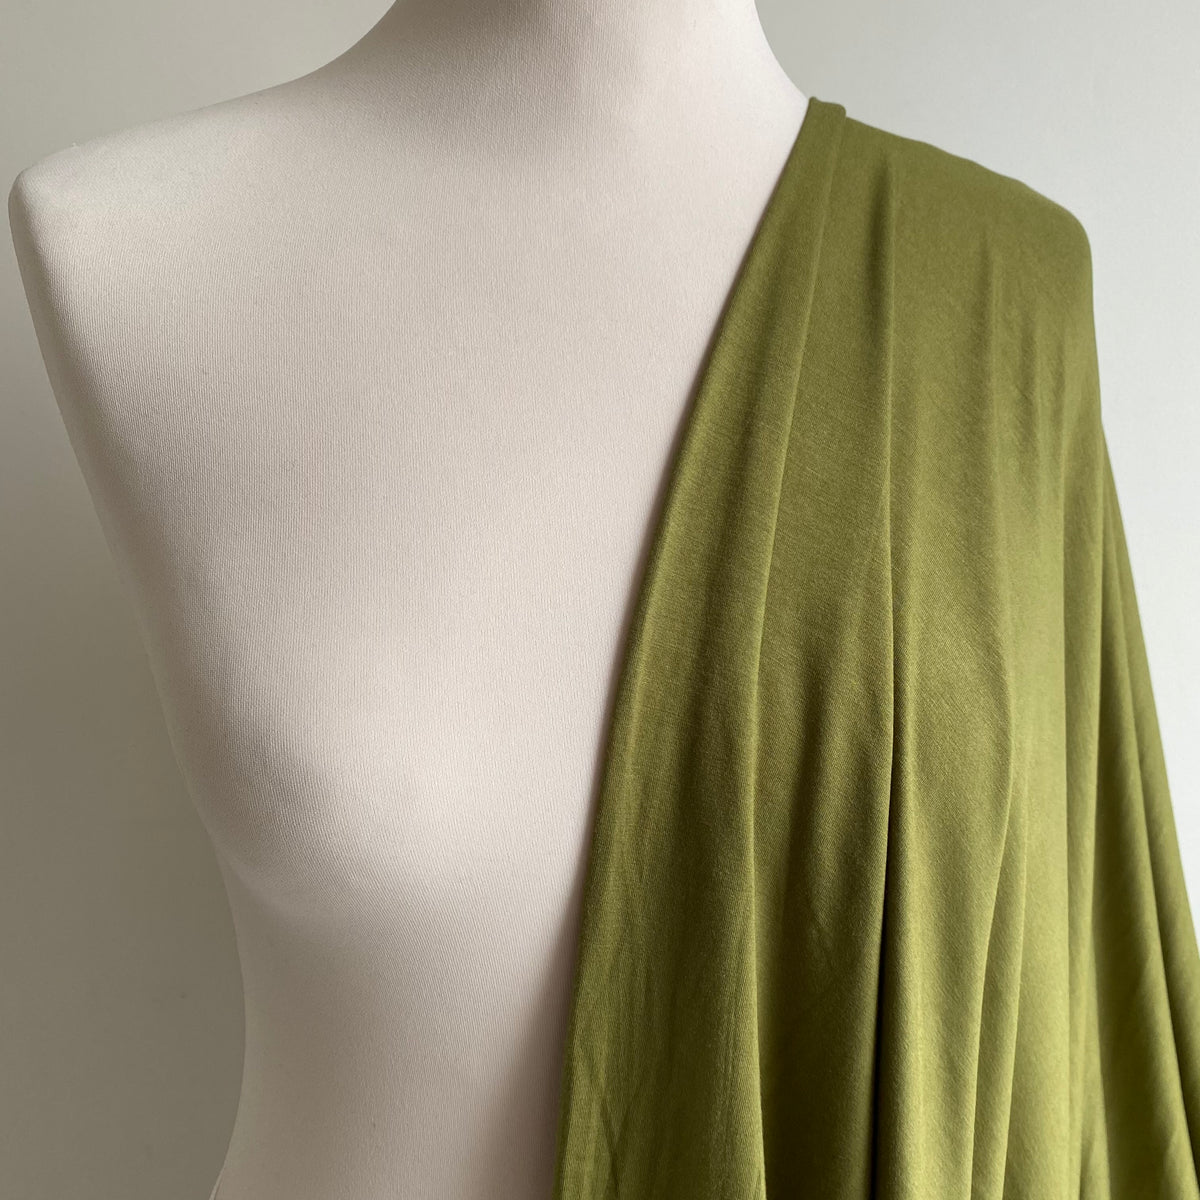 Bamboo Jersey Fabric - Olive Green - Priced per 0.5 metre